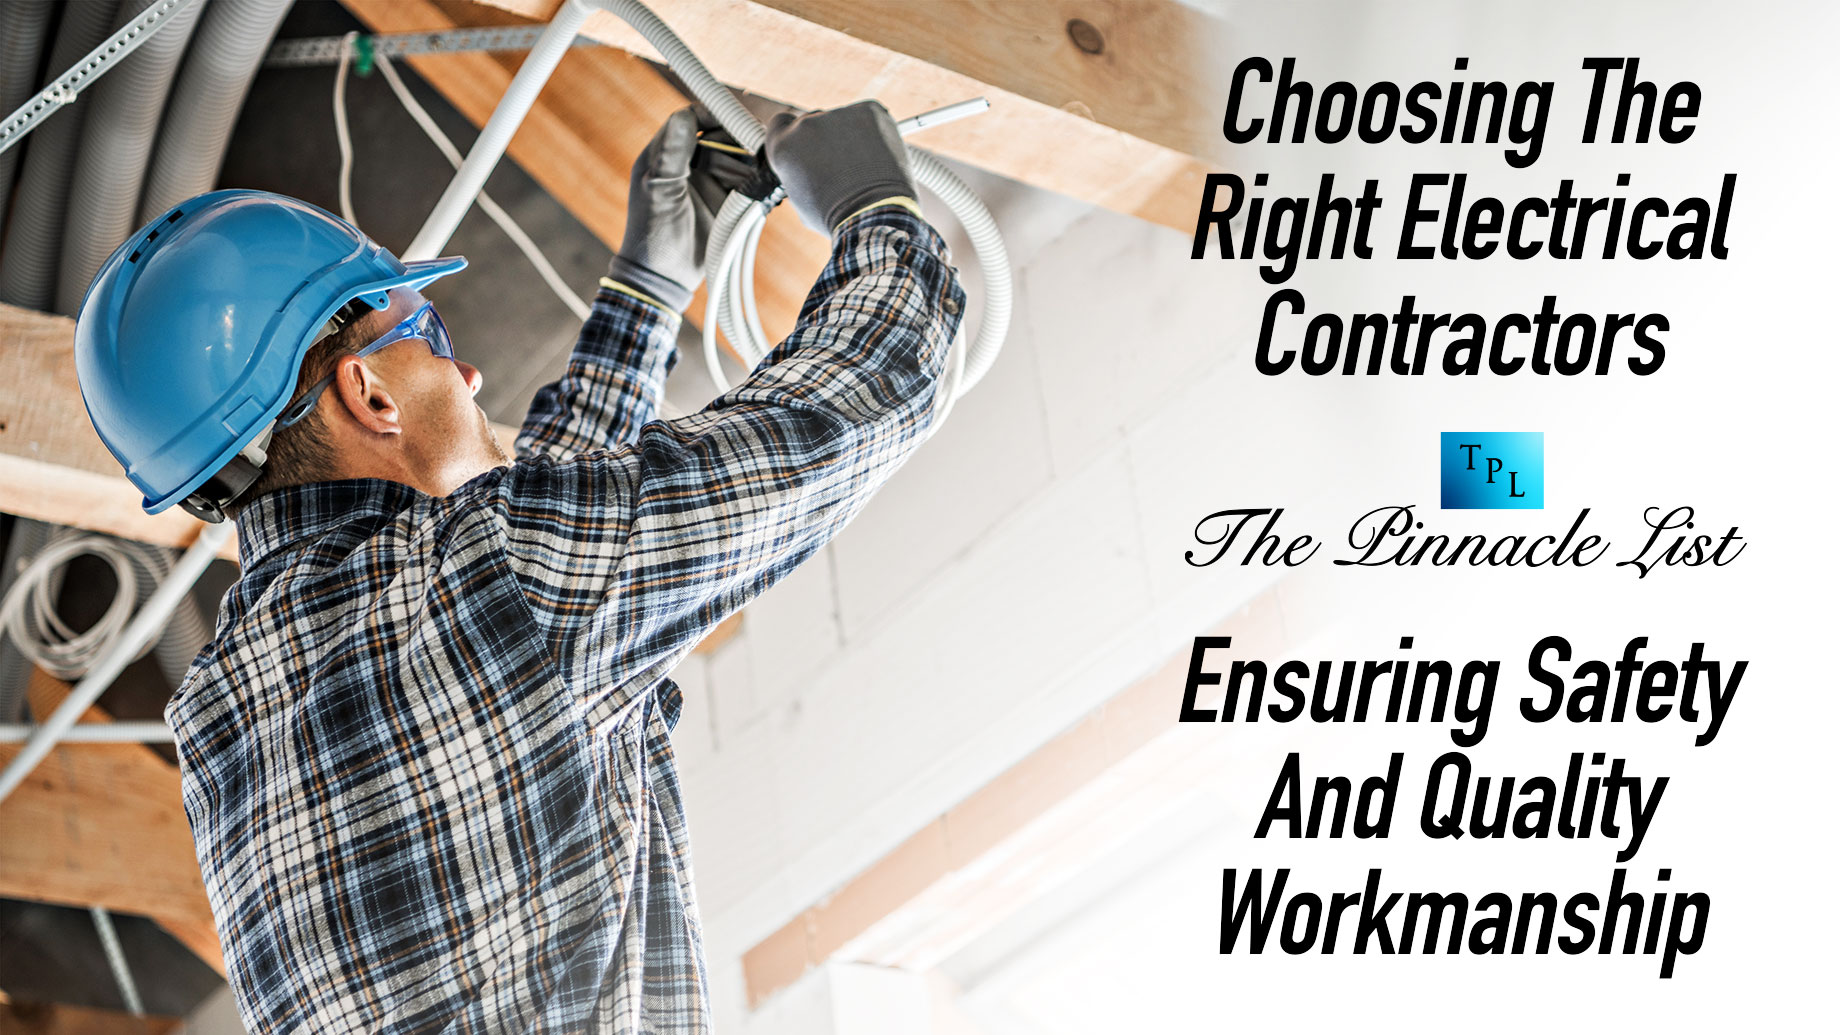 Choosing The Right Electrical Contractors: Ensuring Safety And Quality Workmanship